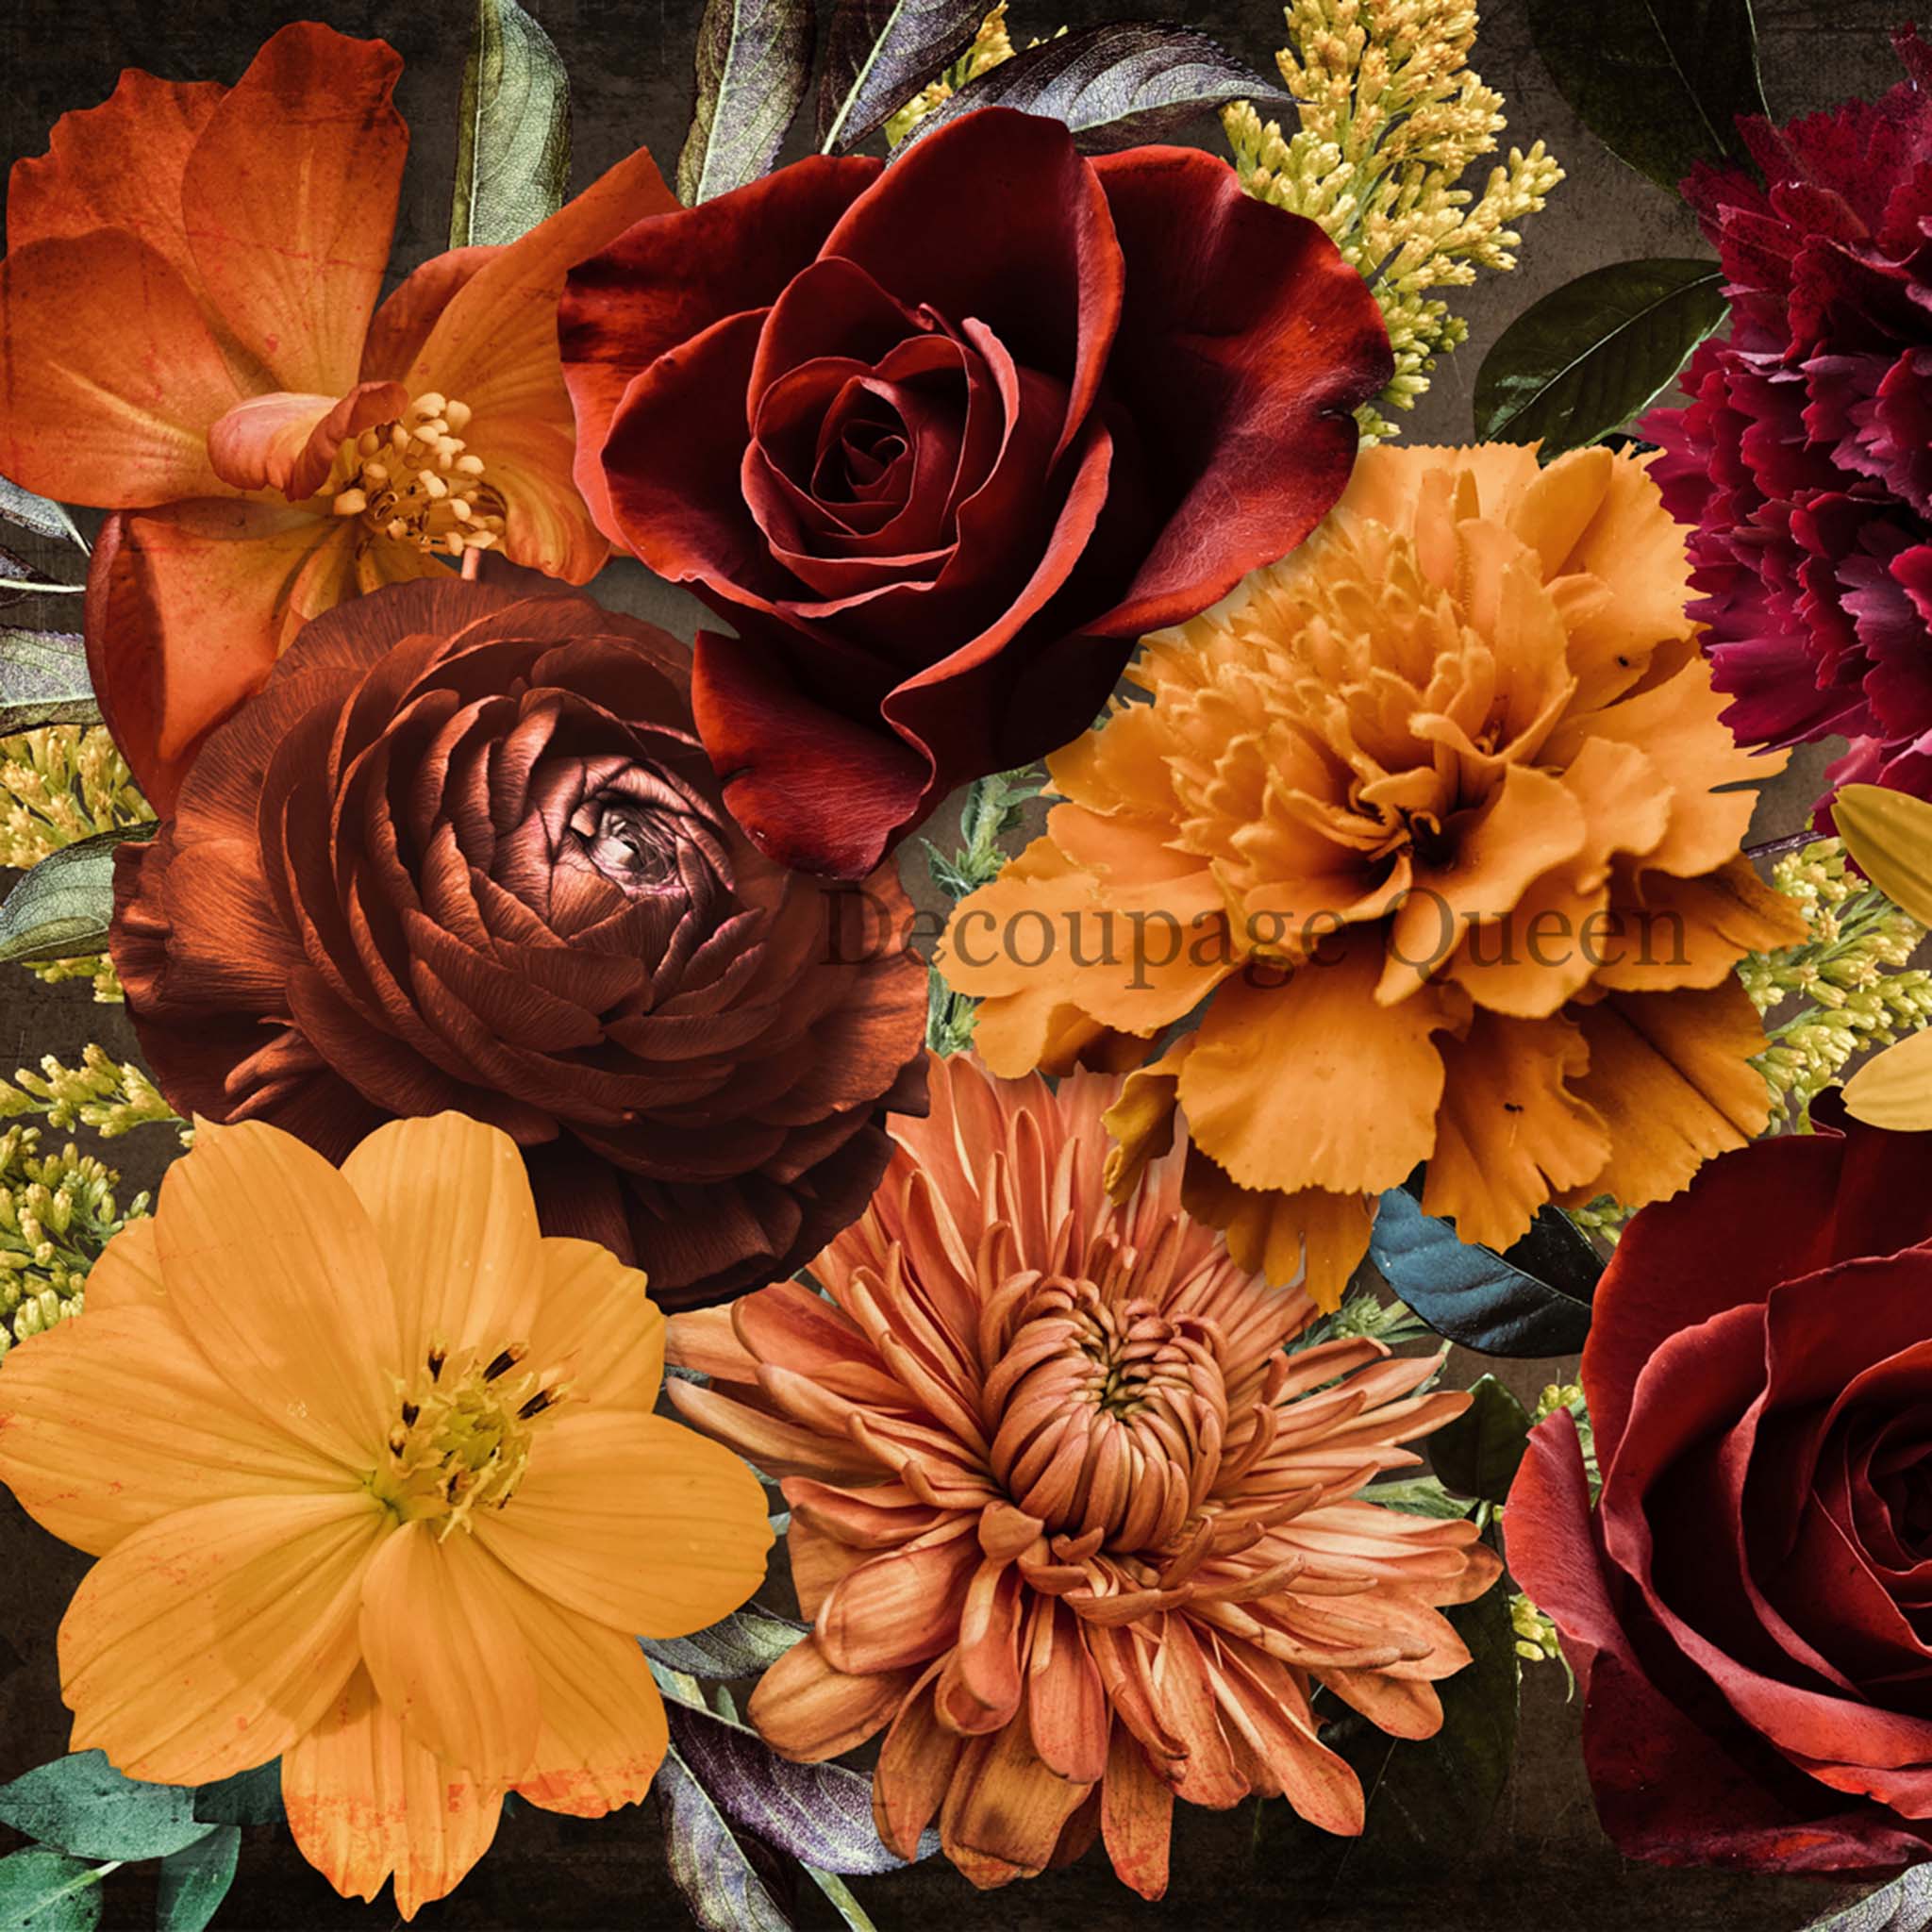 A3 rice paper design that features large burgundy, orange, and autumn colored flowers.